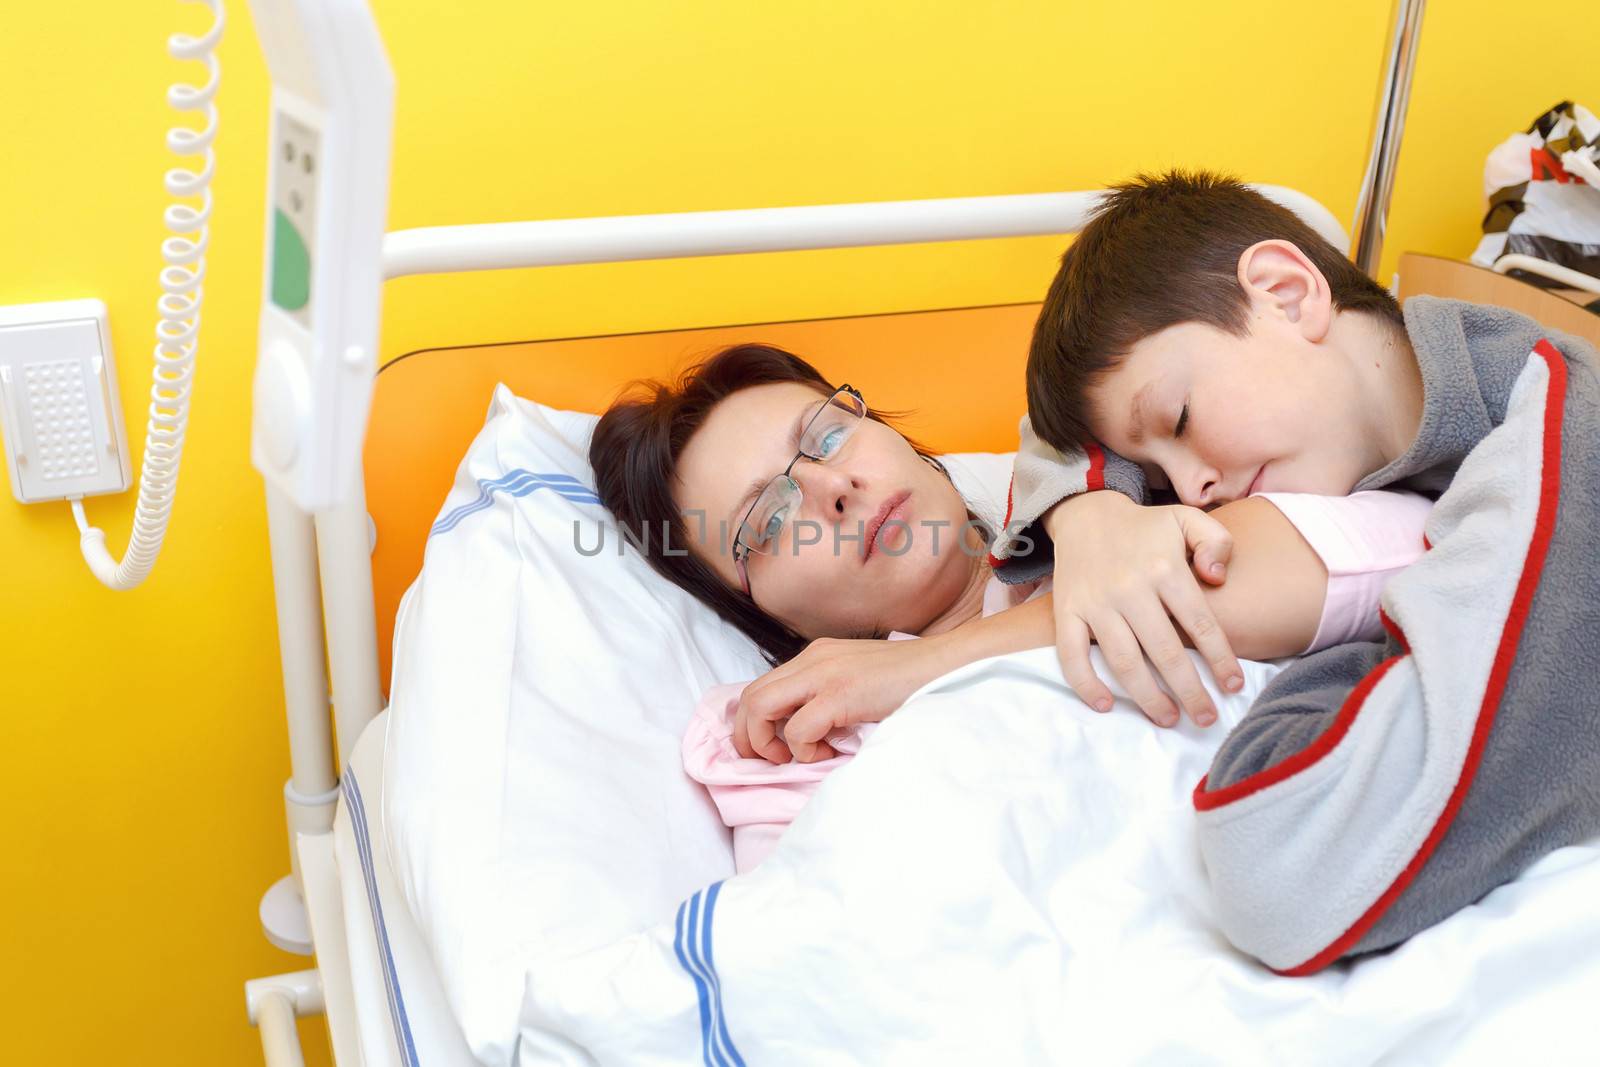 Real people in real situation, sad middle-aged woman lying in hospital with pneumonia, son visit his mother